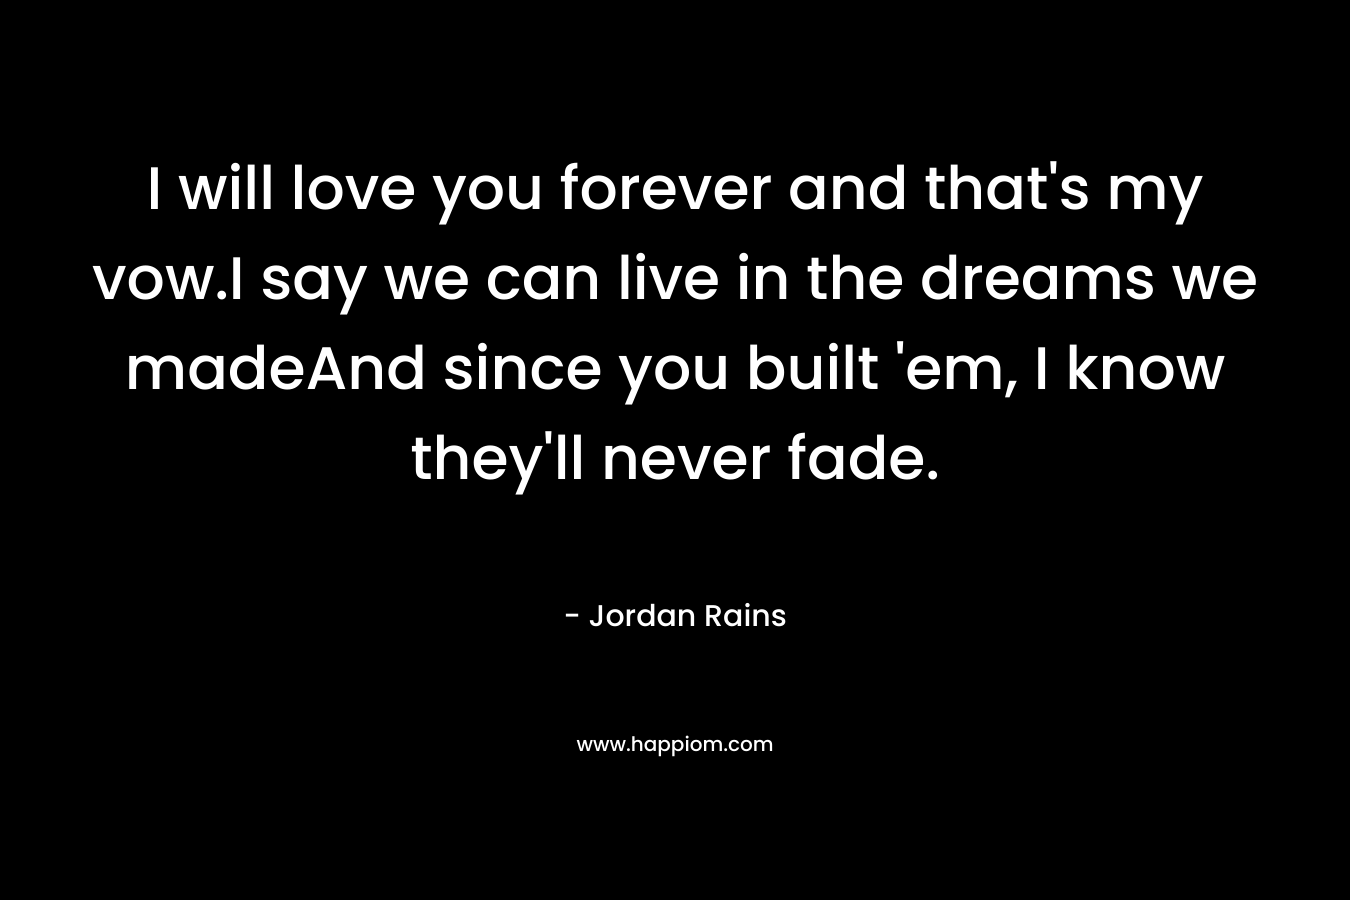 I will love you forever and that’s my vow.I say we can live in the dreams we madeAnd since you built ’em, I know they’ll never fade. – Jordan Rains